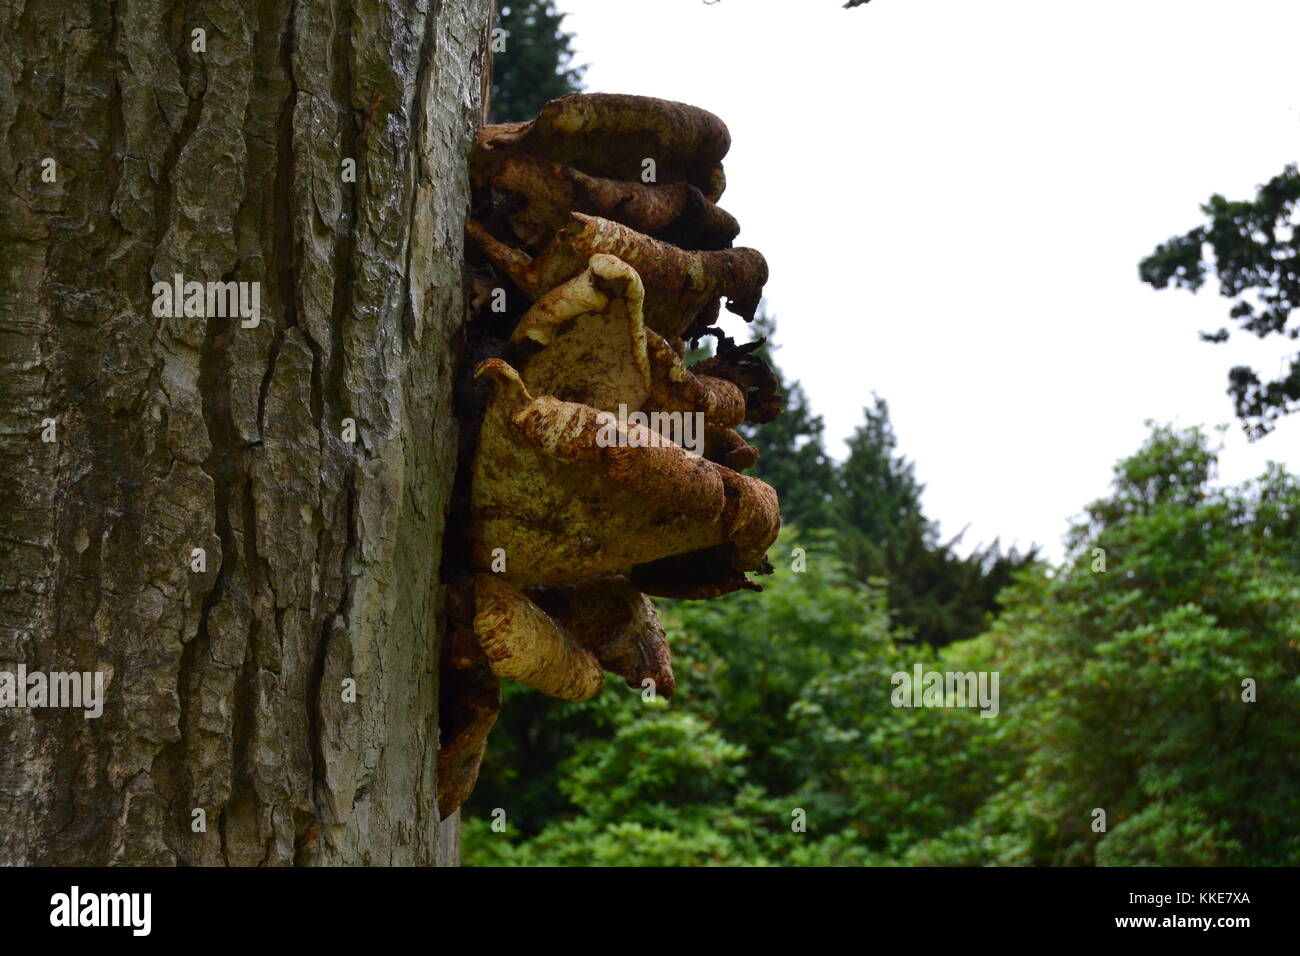 Fungus growing on tree in forest Stock Photo